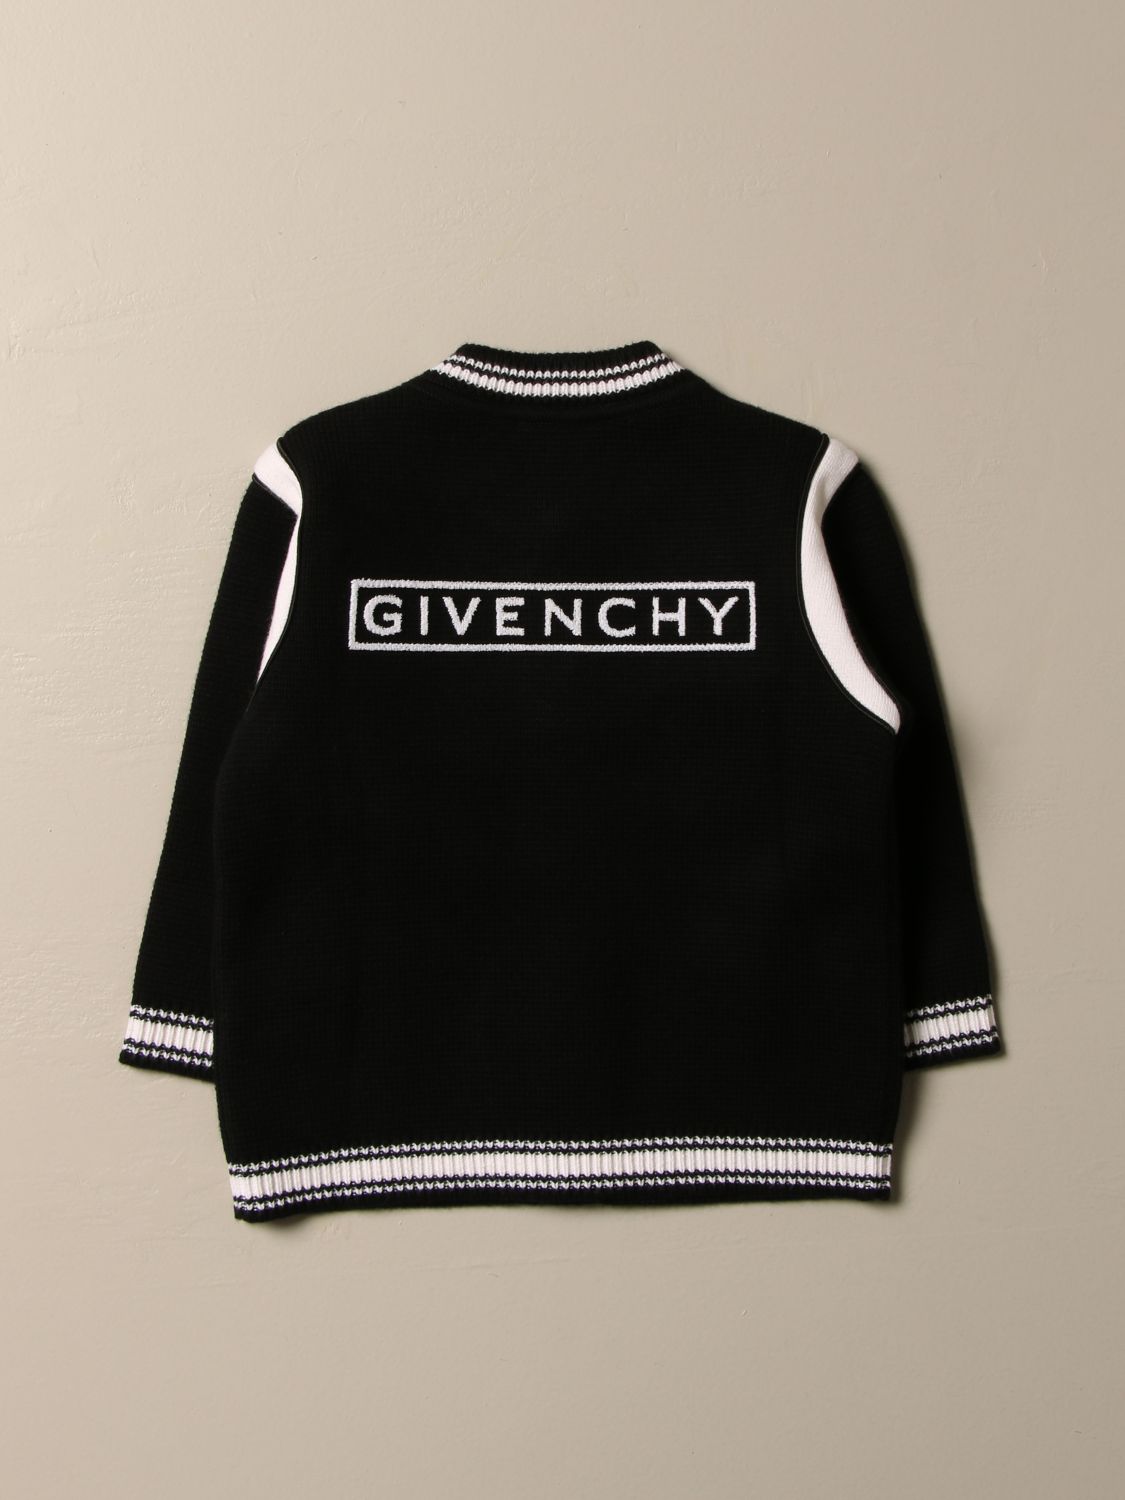 GIVENCHY: Jersey niños | Jersey Givenchy Niños Negro | Jersey Givenchy  H05134 Giglio ES